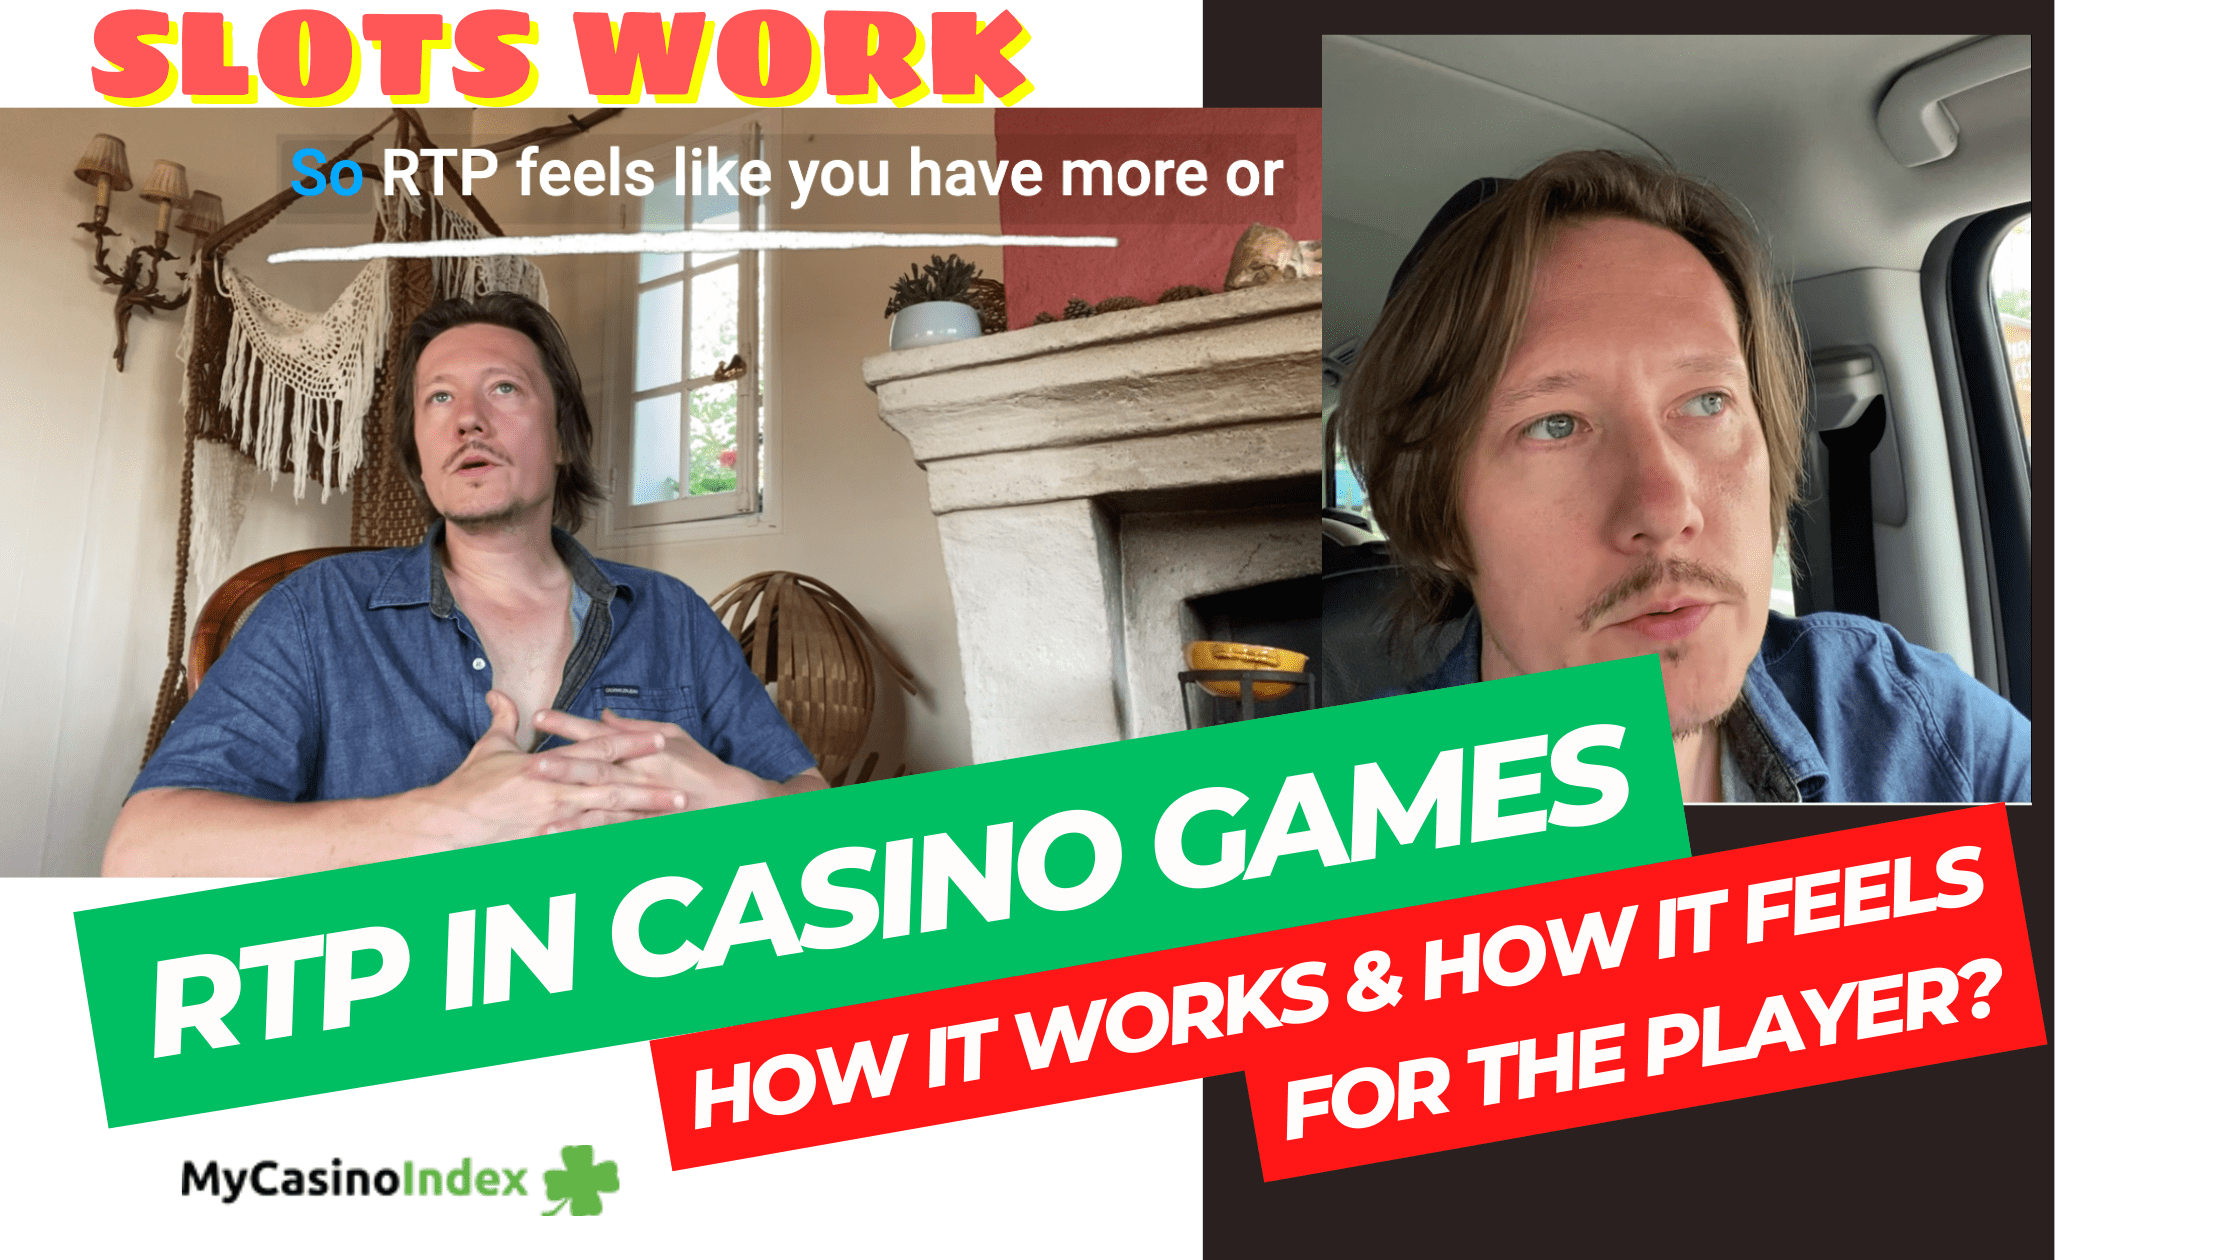 RTP in casino games: how it works and how it feels for the player? logotype